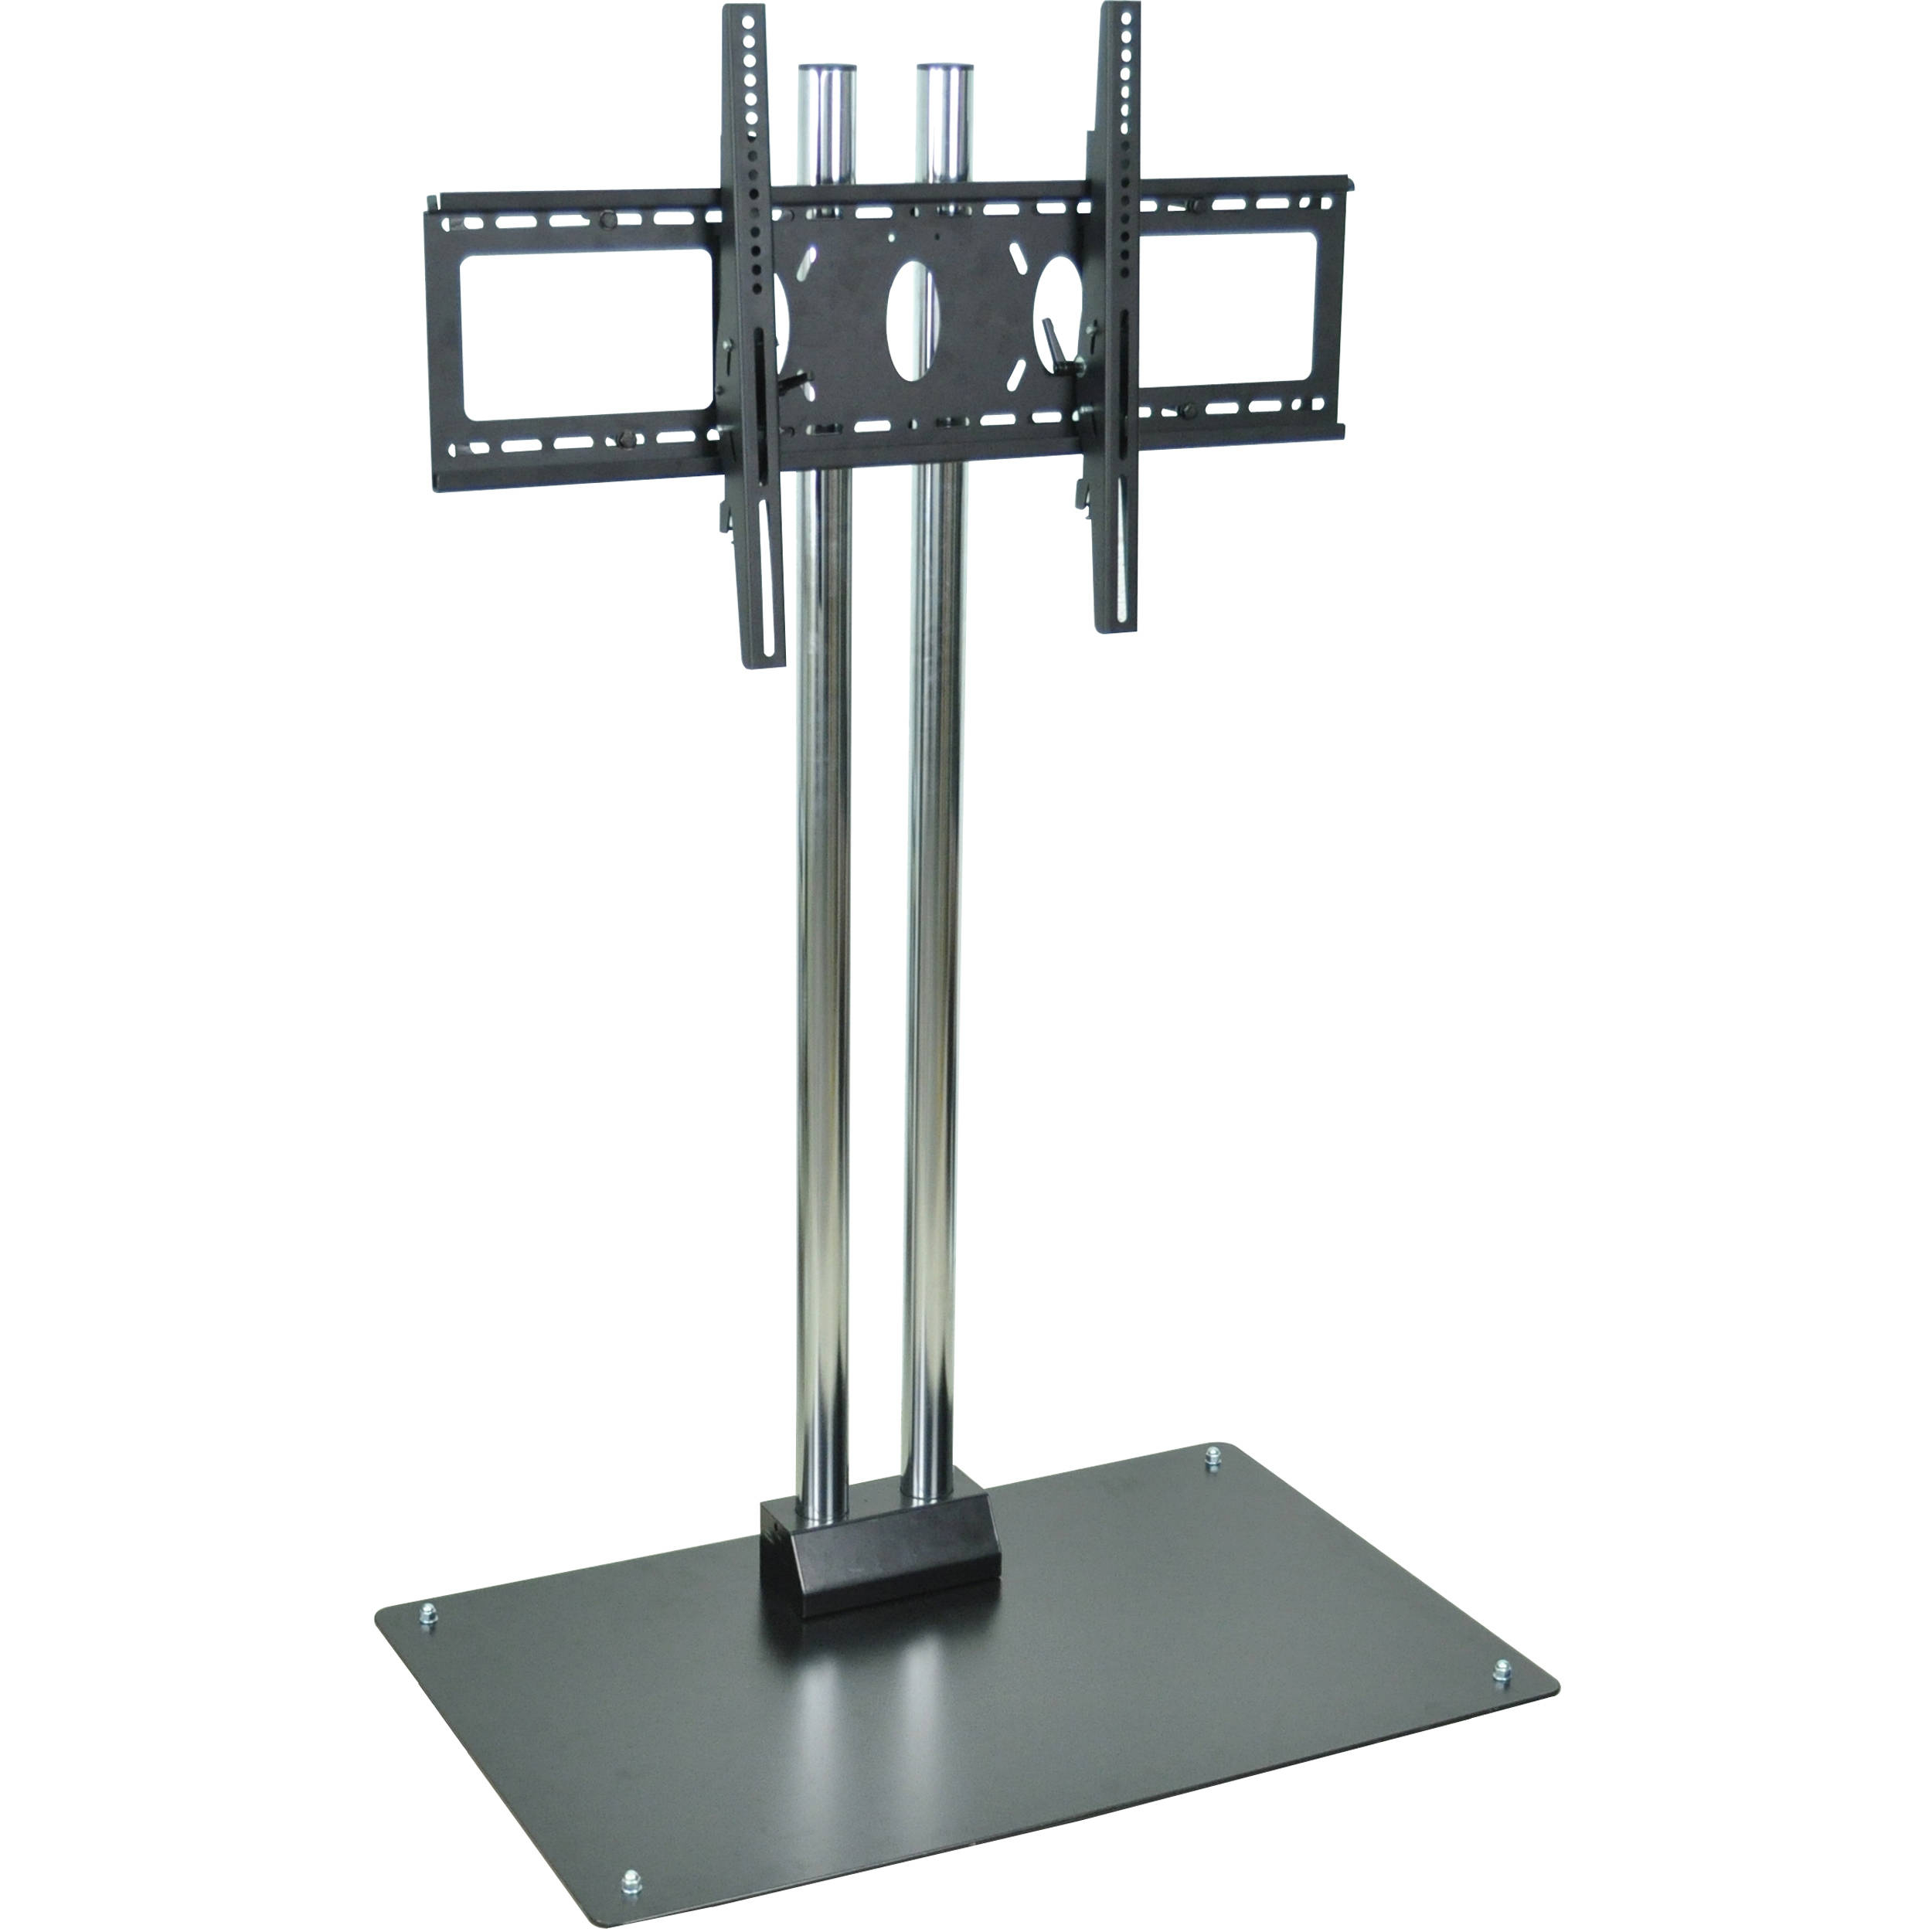 Fixed Floor Stand Mount for 32" - 60" Flat Panel Screens